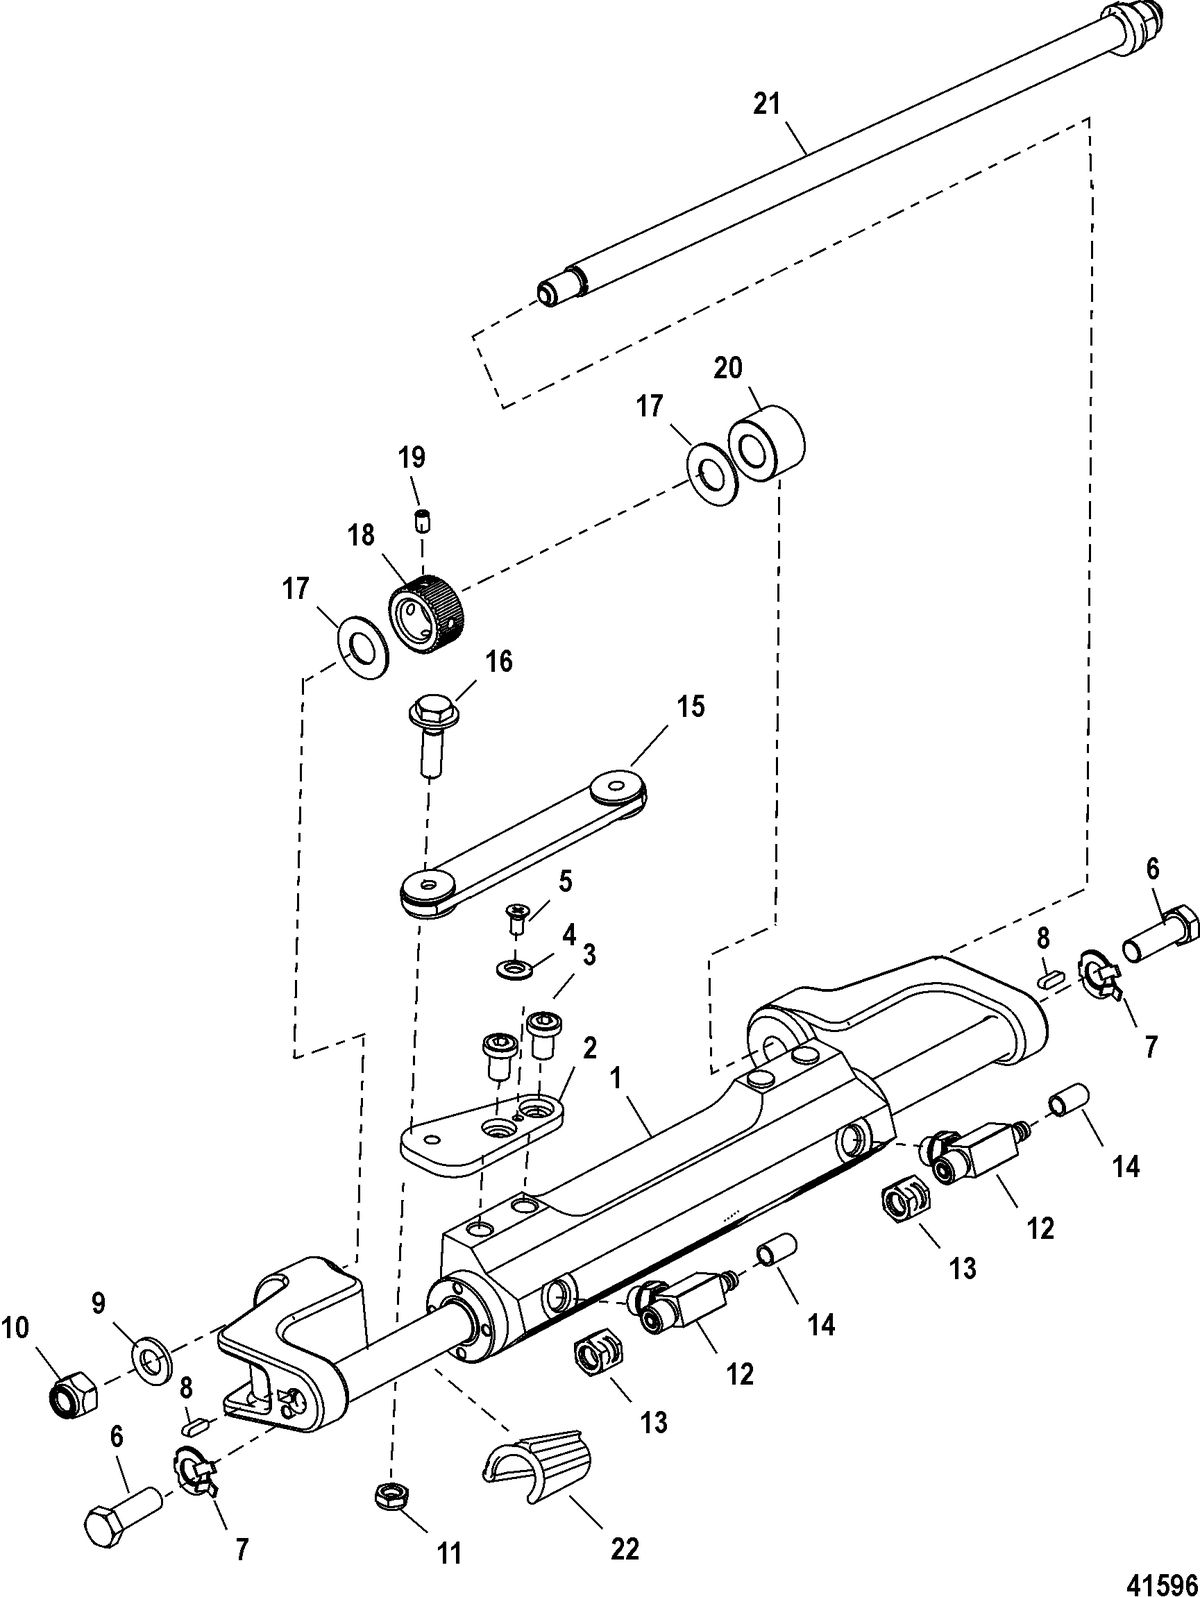 ACCESSORIES STEERING SYSTEMS AND COMPONENTS Steering Actuator Assembly(898349A11)